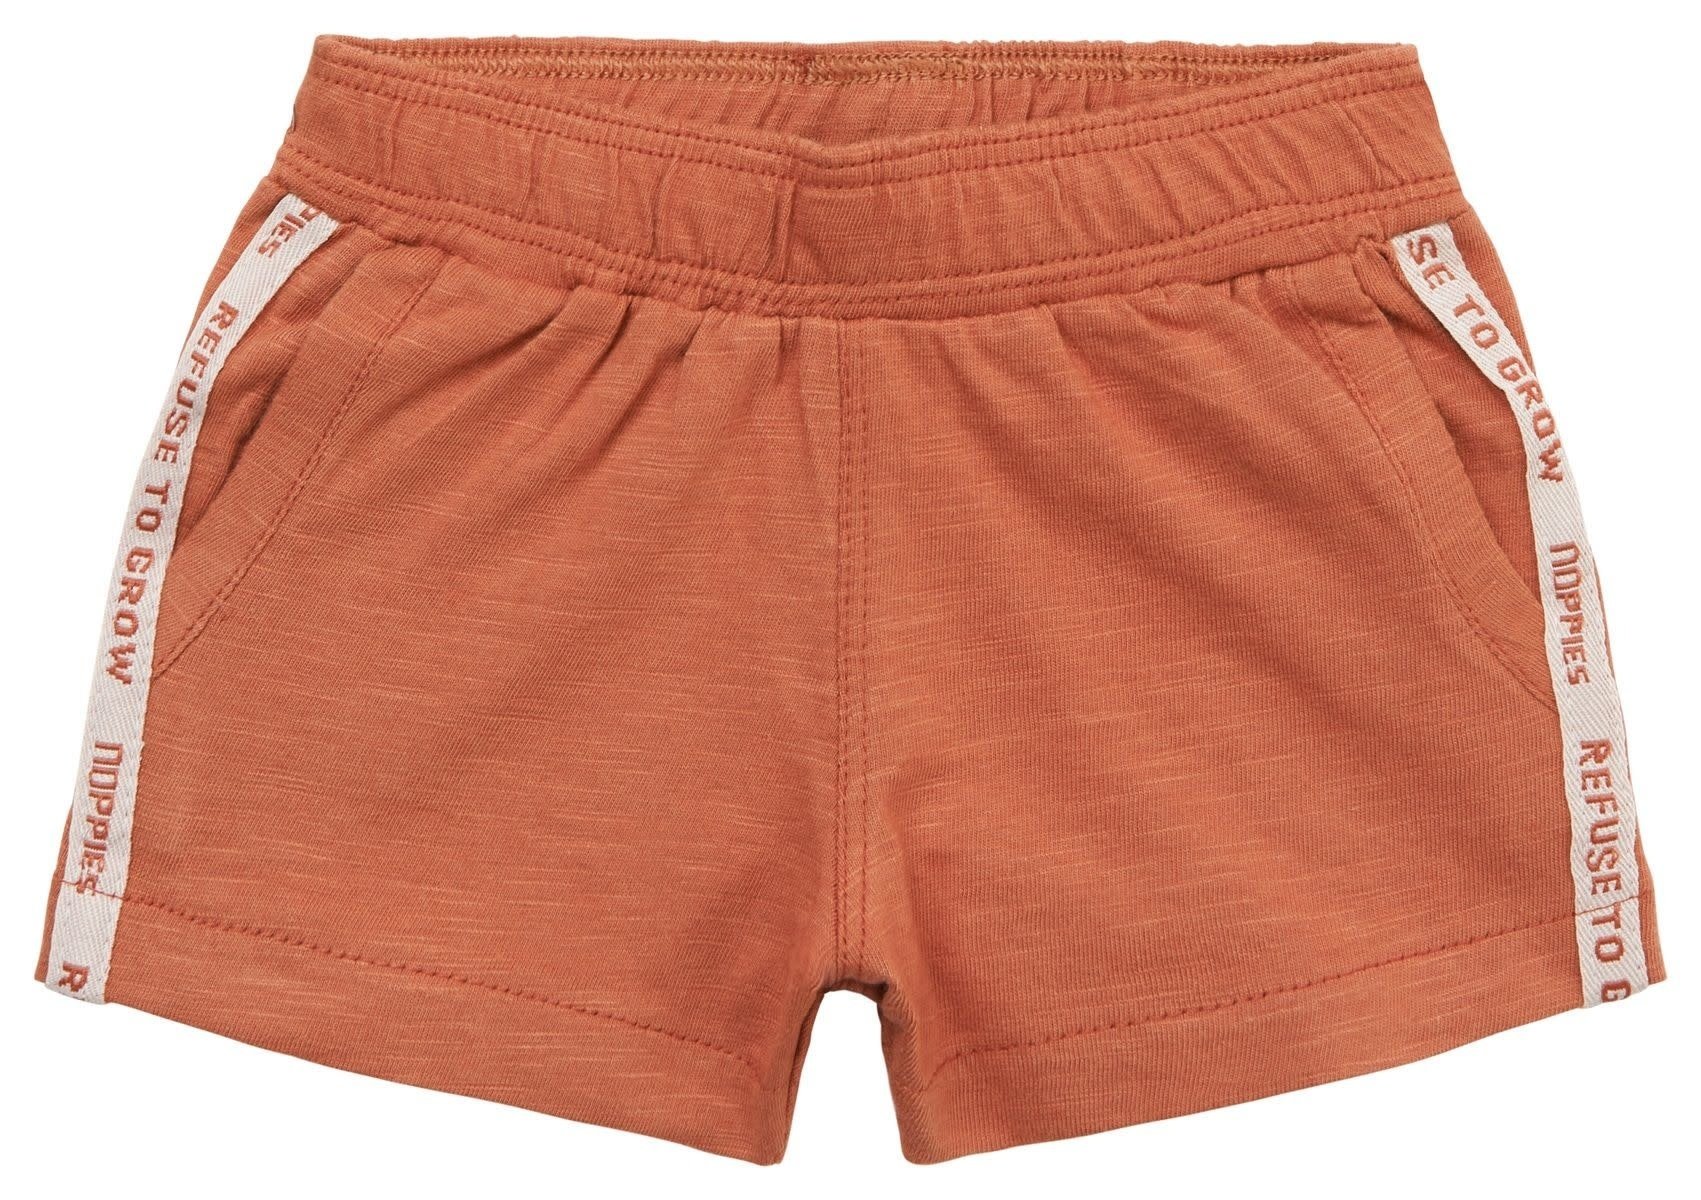 Noppies Madrid Shorts  - Size 68 (4-6 months)